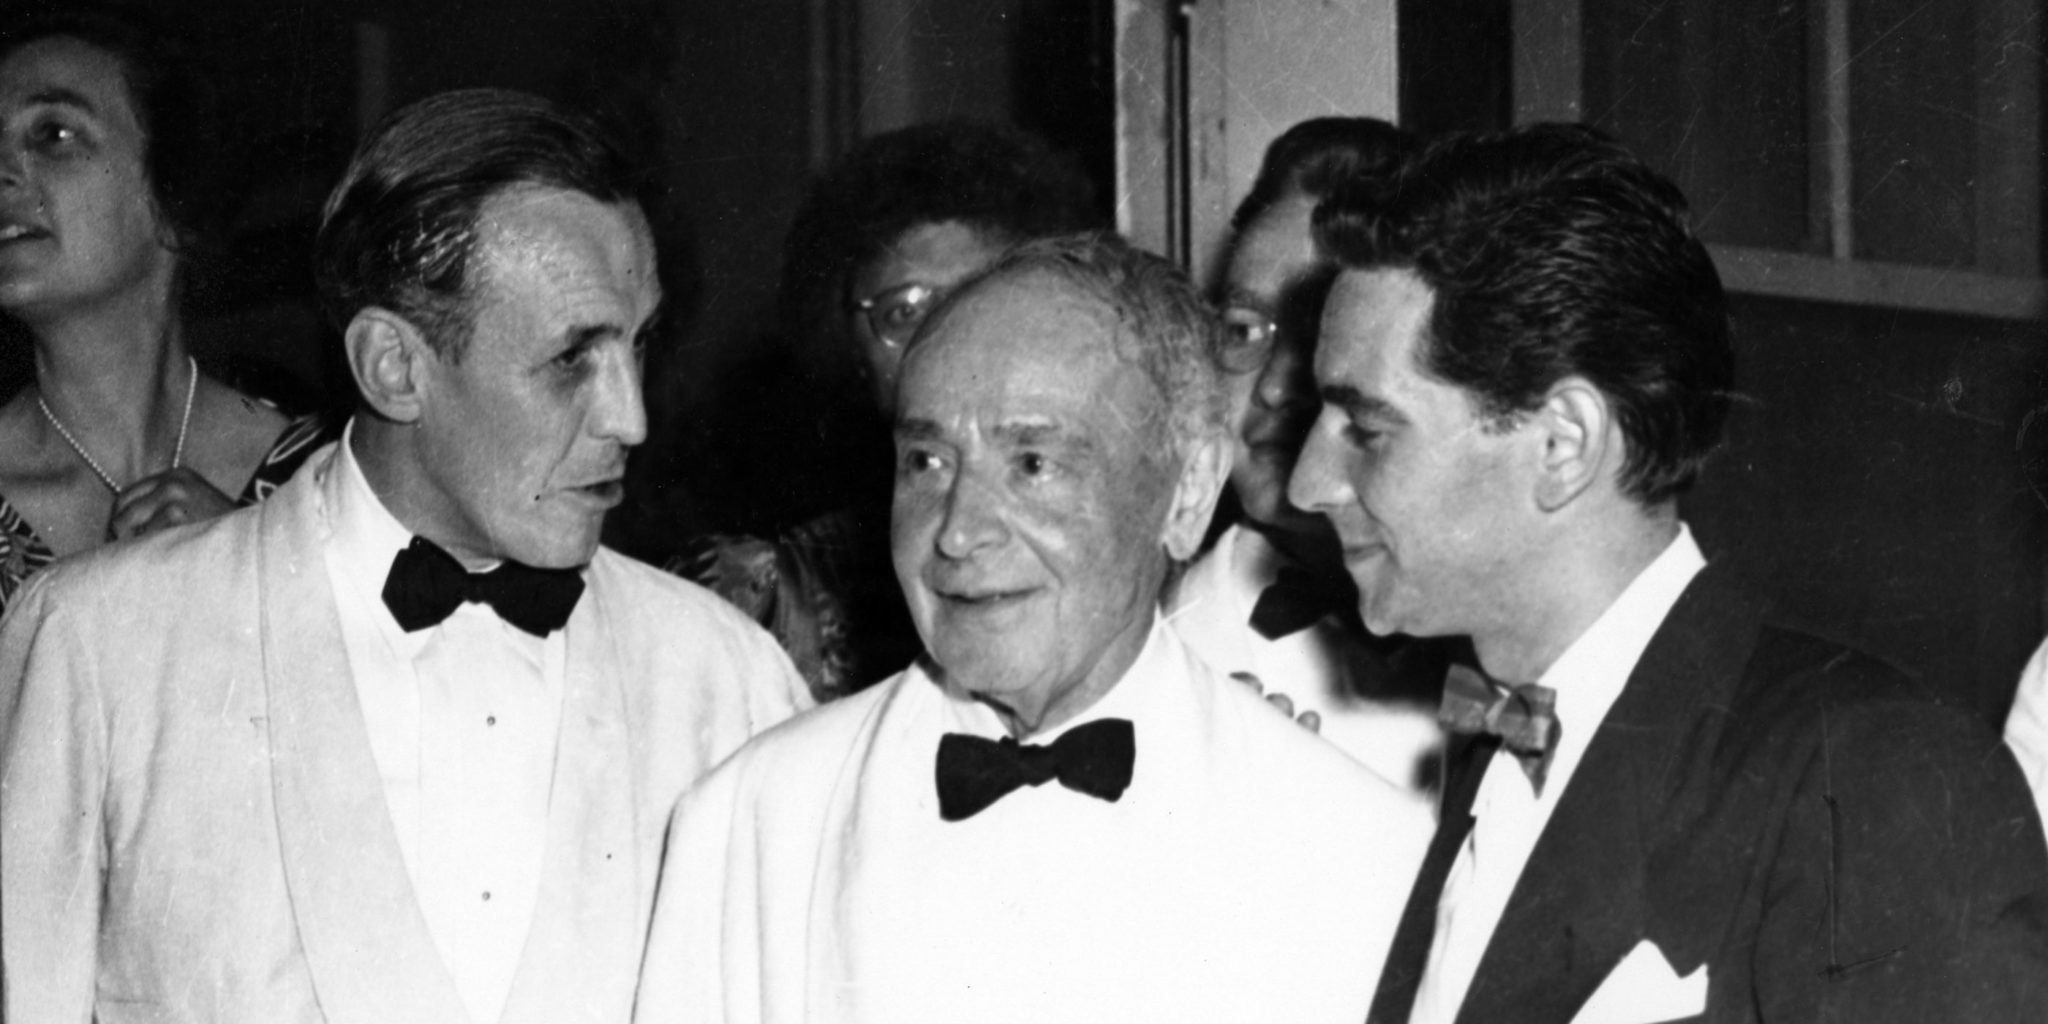 Serge Koussevitzky with his conducting assistants at the TMC, Stanley Chapple (left), and Leonard Bernstein, ca. 1950. (Credit: Heinz Weissenstein, Whitestone Photo/BSO Archives)